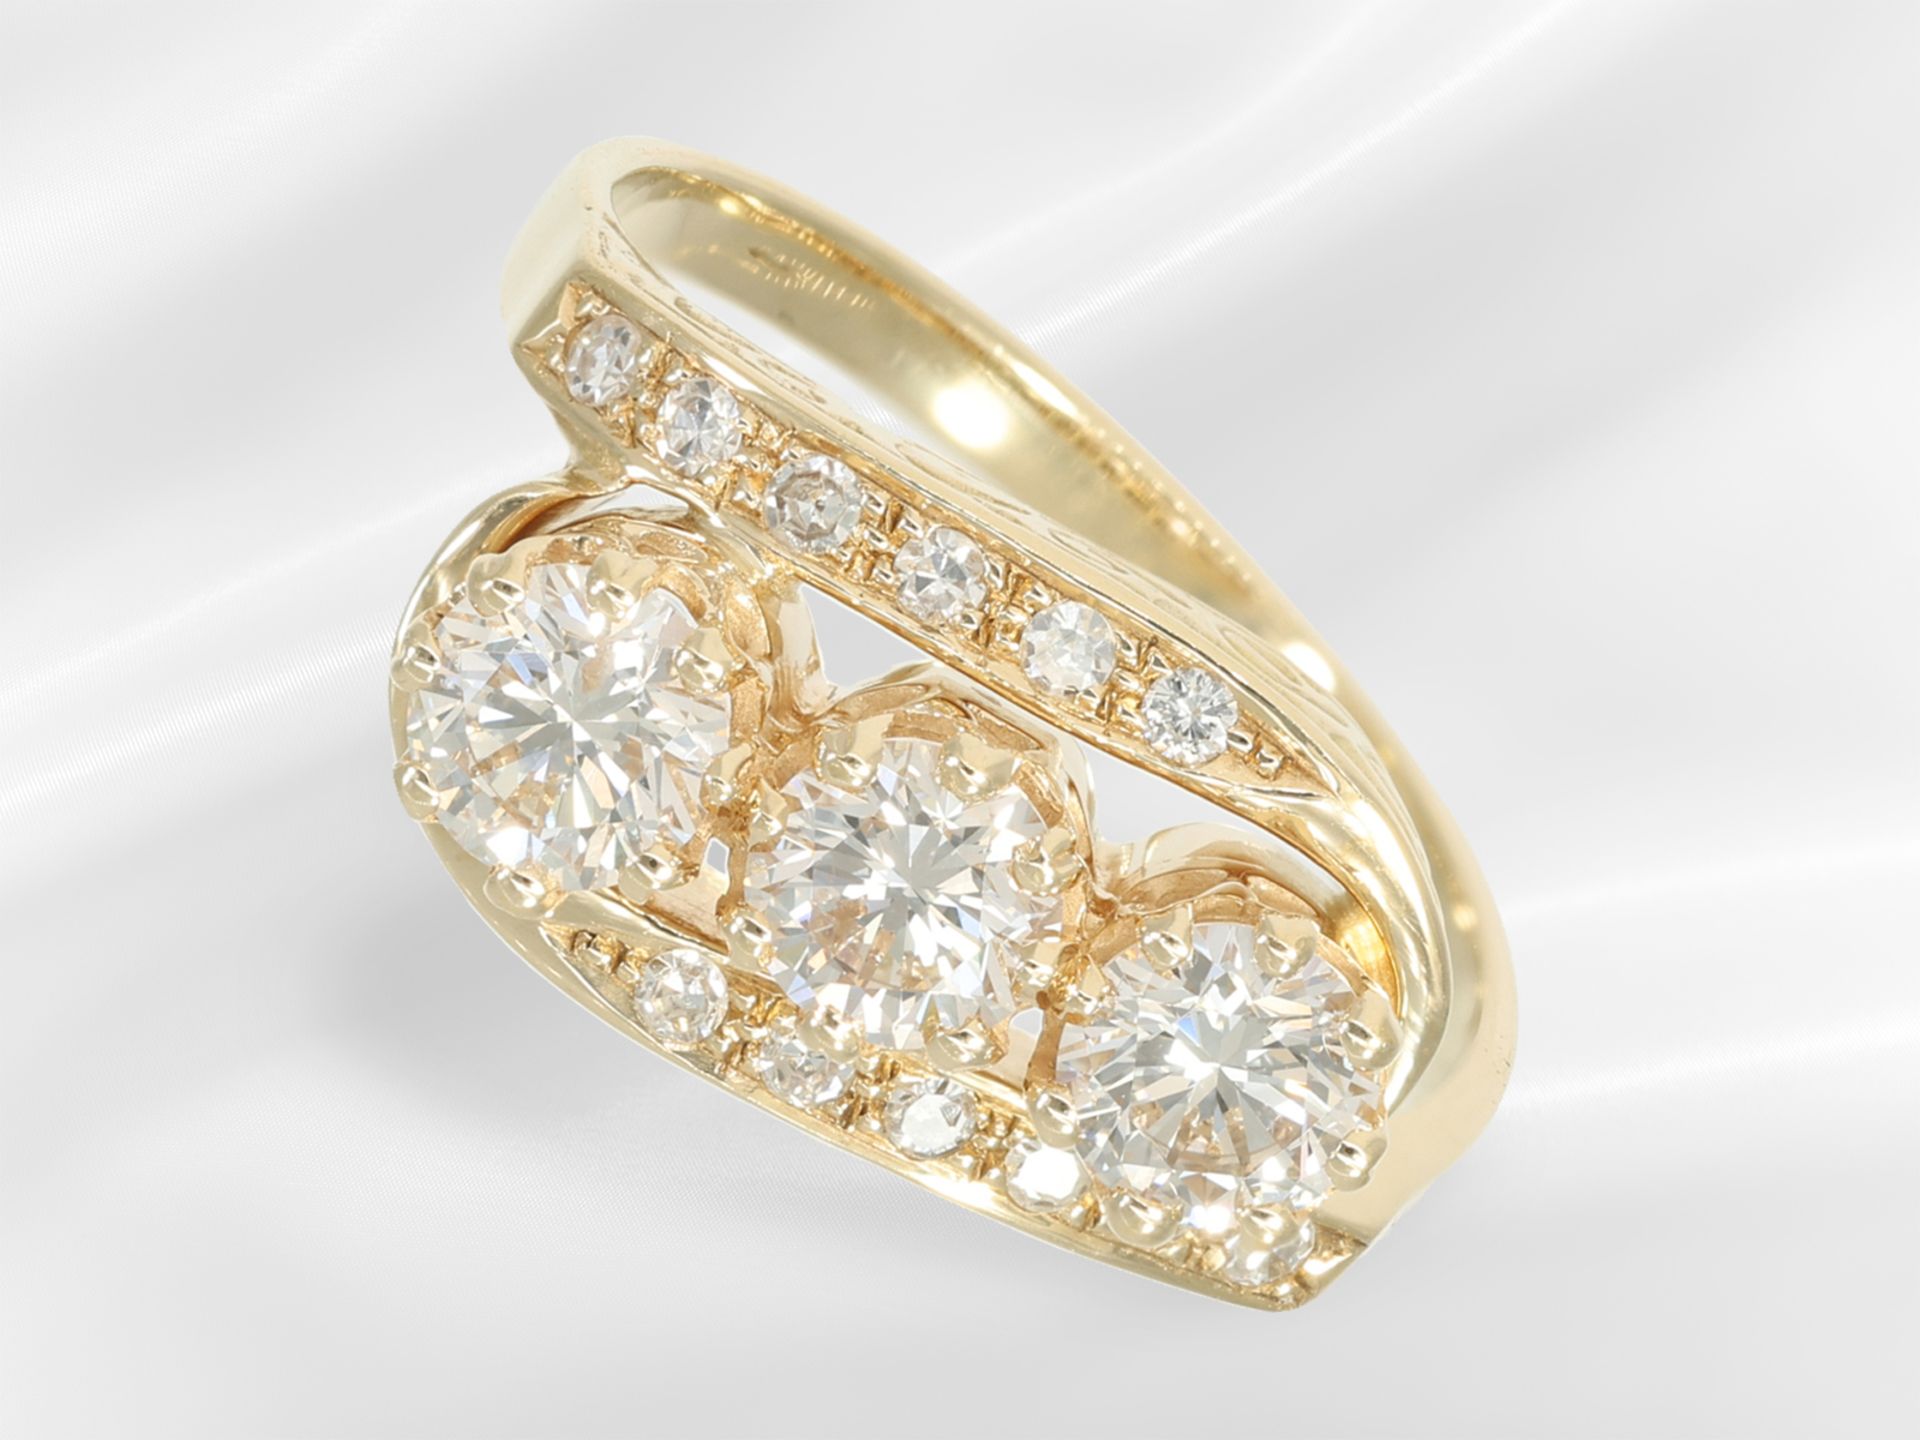 Ring: beautiful ladies' ring with brilliant-cut diamonds, approx. 1ct